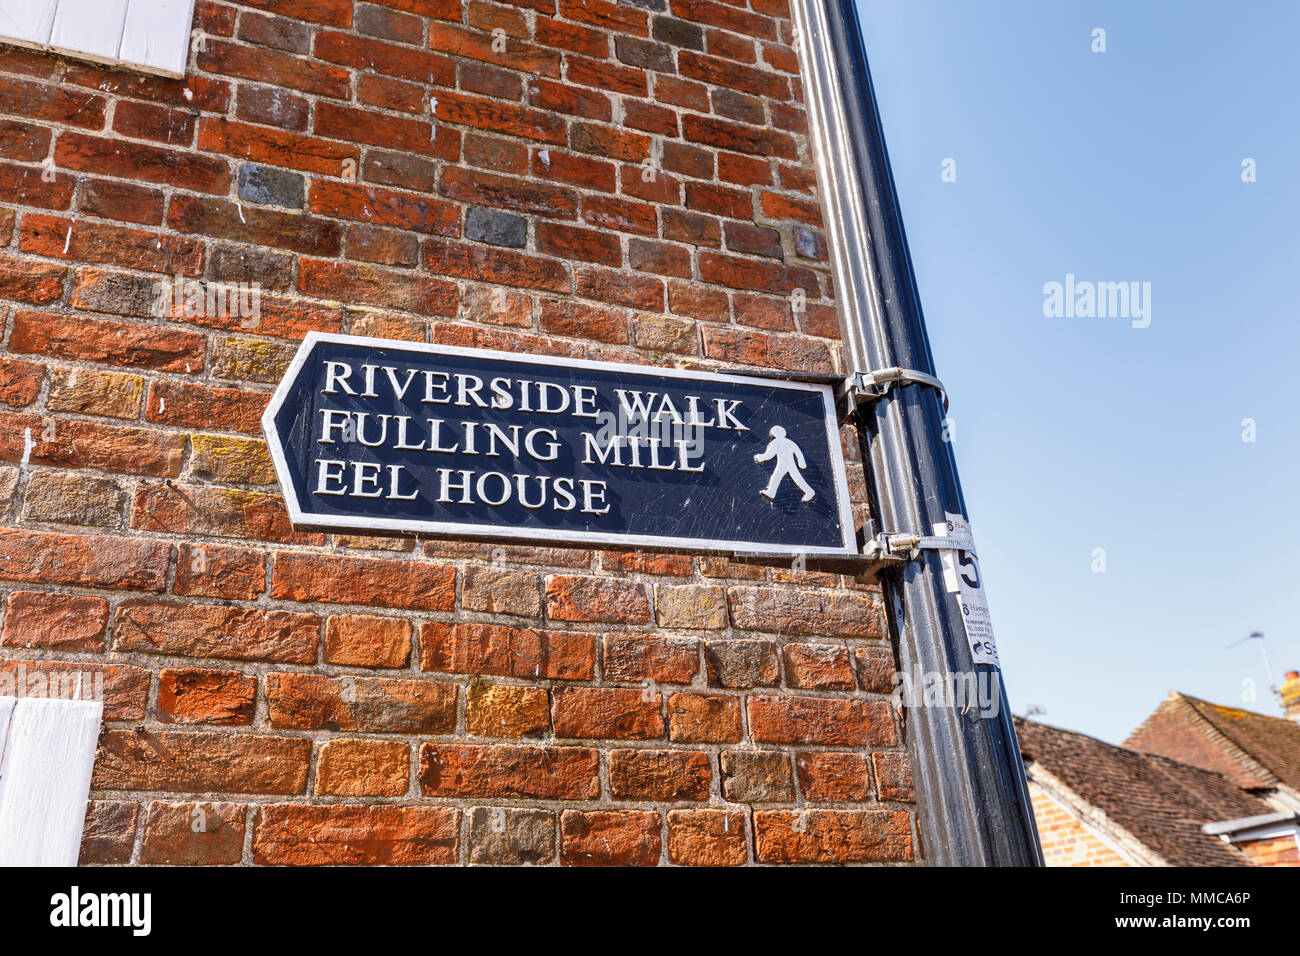 Sign pointing to the Riverside Walk, Fulling Mill and Eel House, local walks & attractions in New Alresford, a small town or village in Hampshire, UK Stock Photo